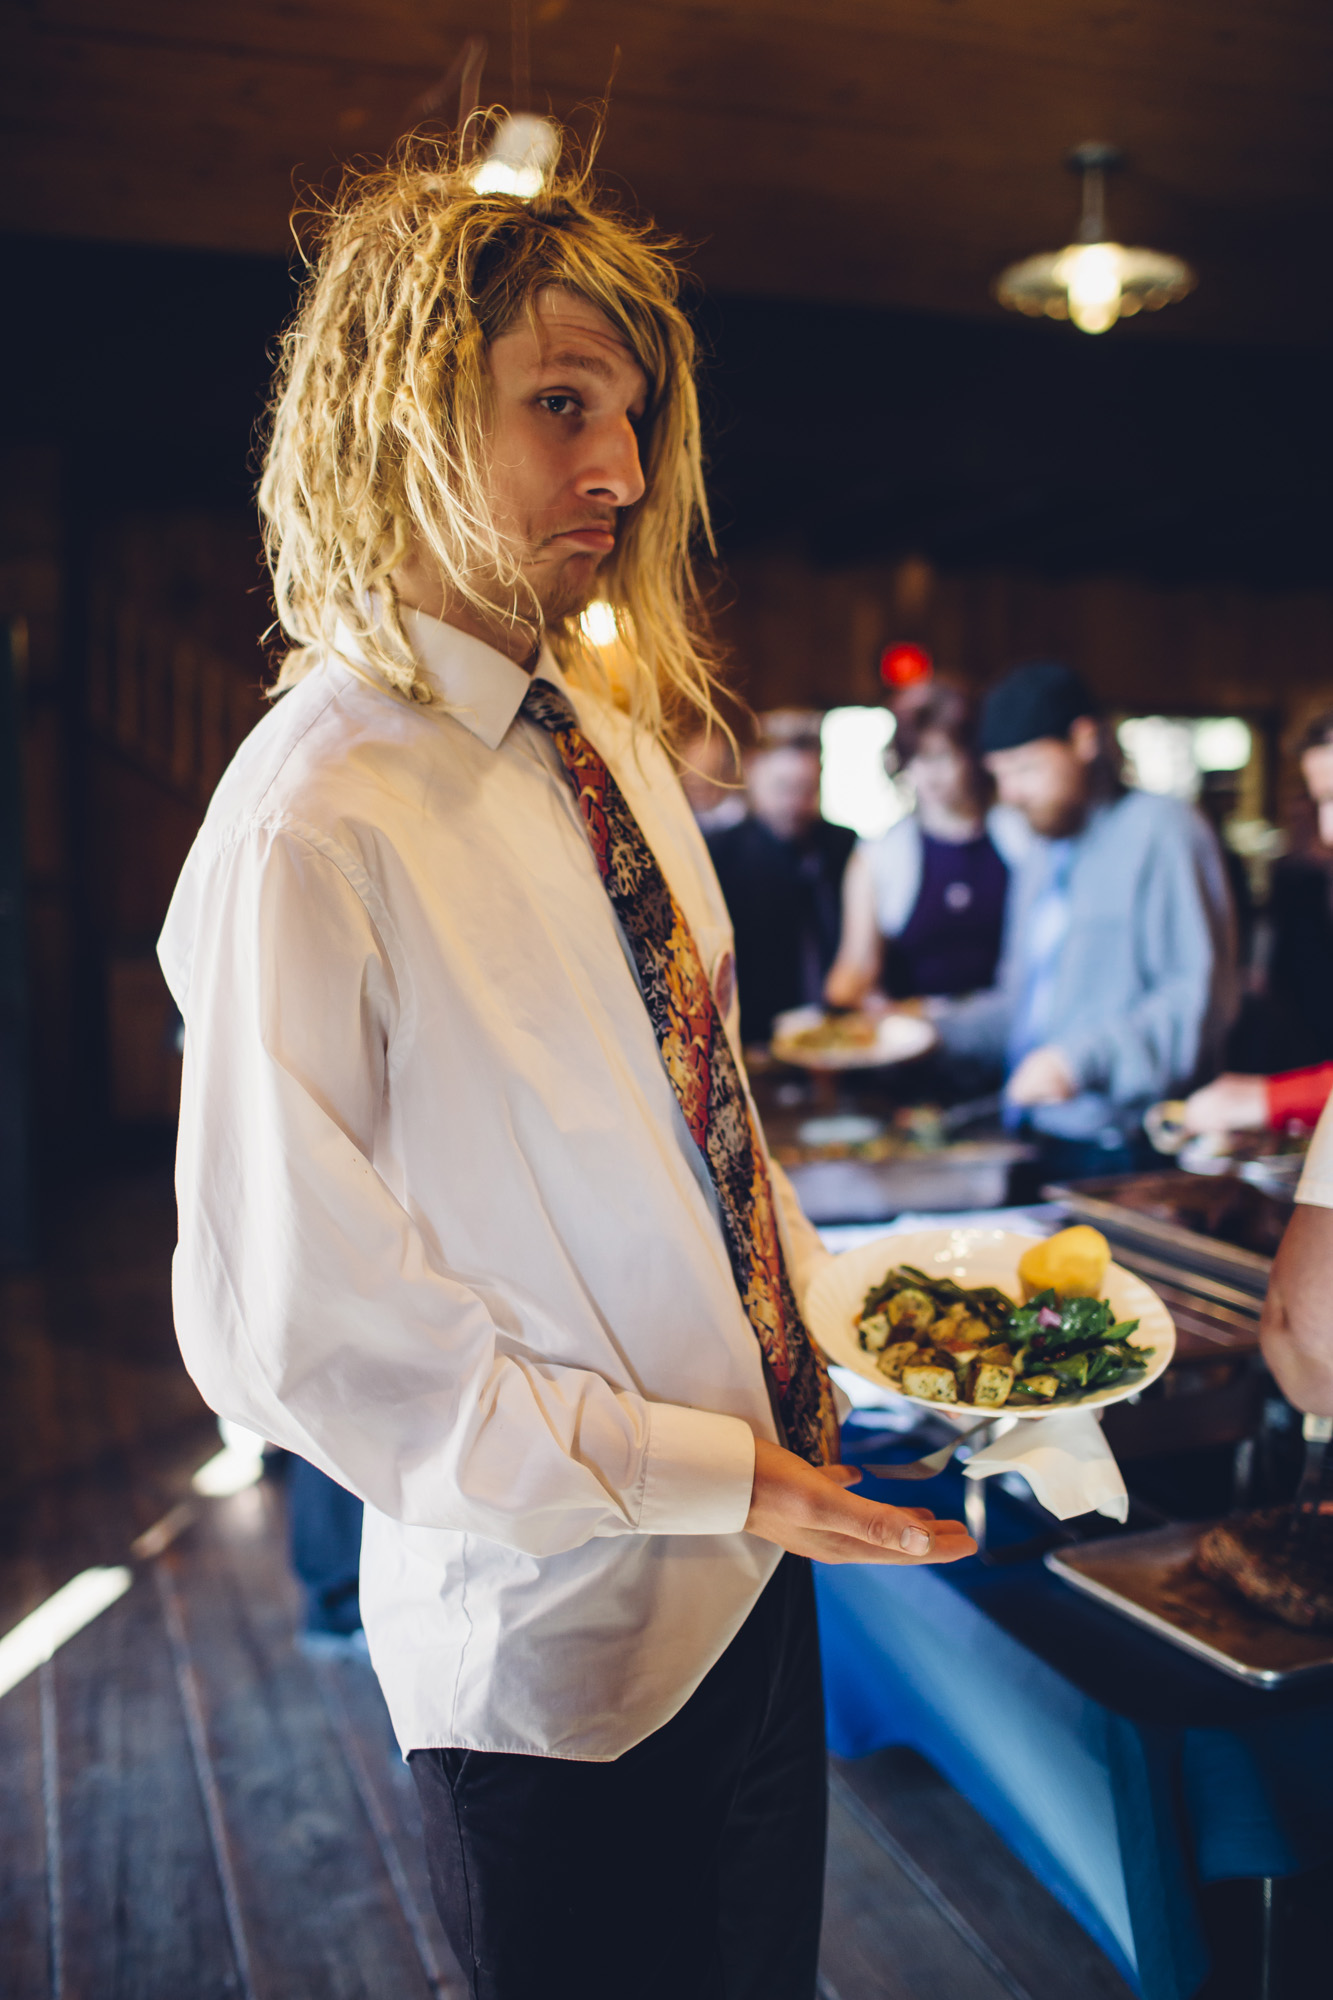 Man with Food and Dreads